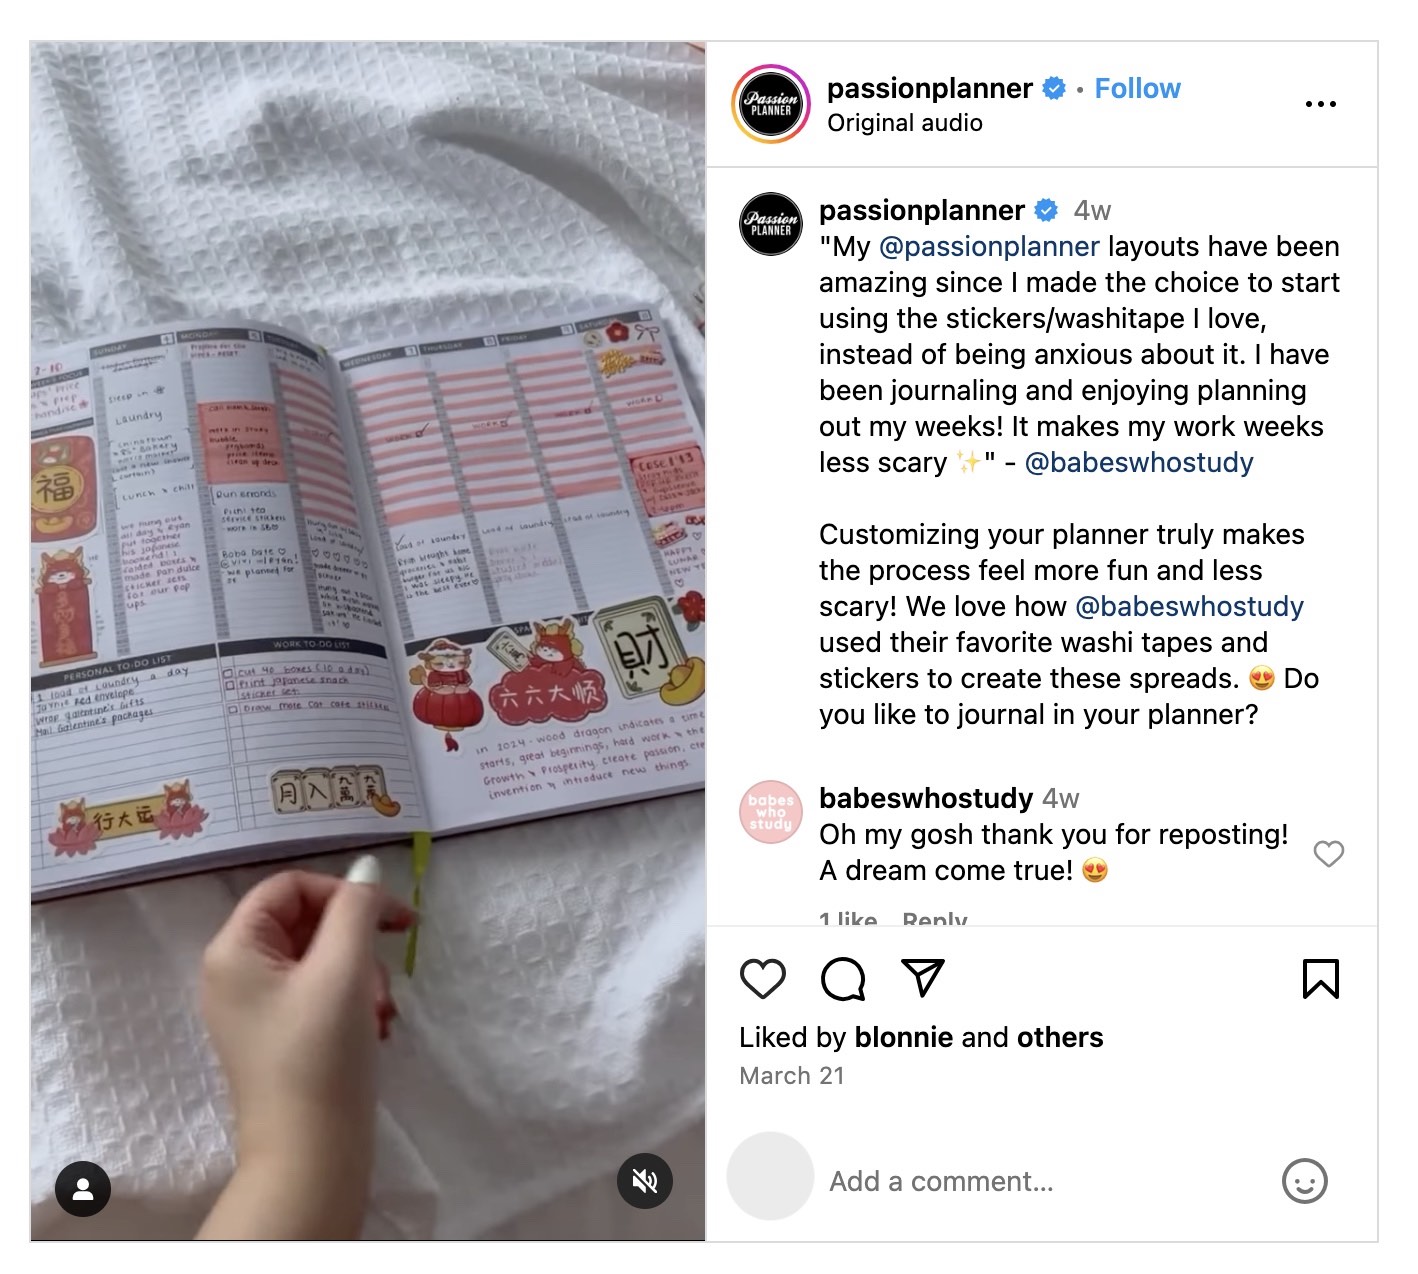 Post on Instagram by 'Passion Planner' featuring user-generated content of a customer using one of their products.